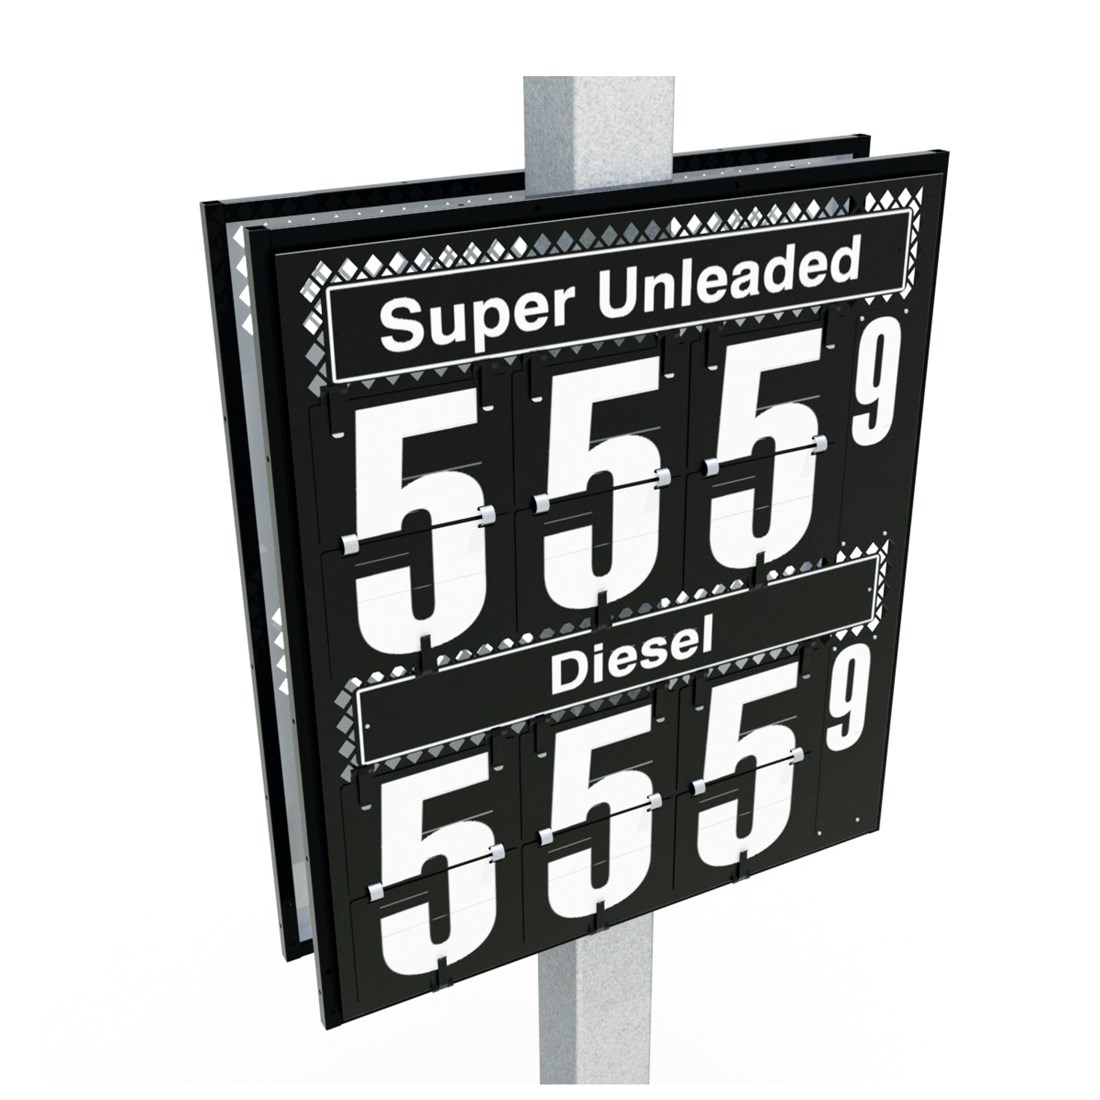 FOR  SALE-SOLD-AUTOMATIC-DIESEL-NEW ALL PLASTIC COATED SIGNS 